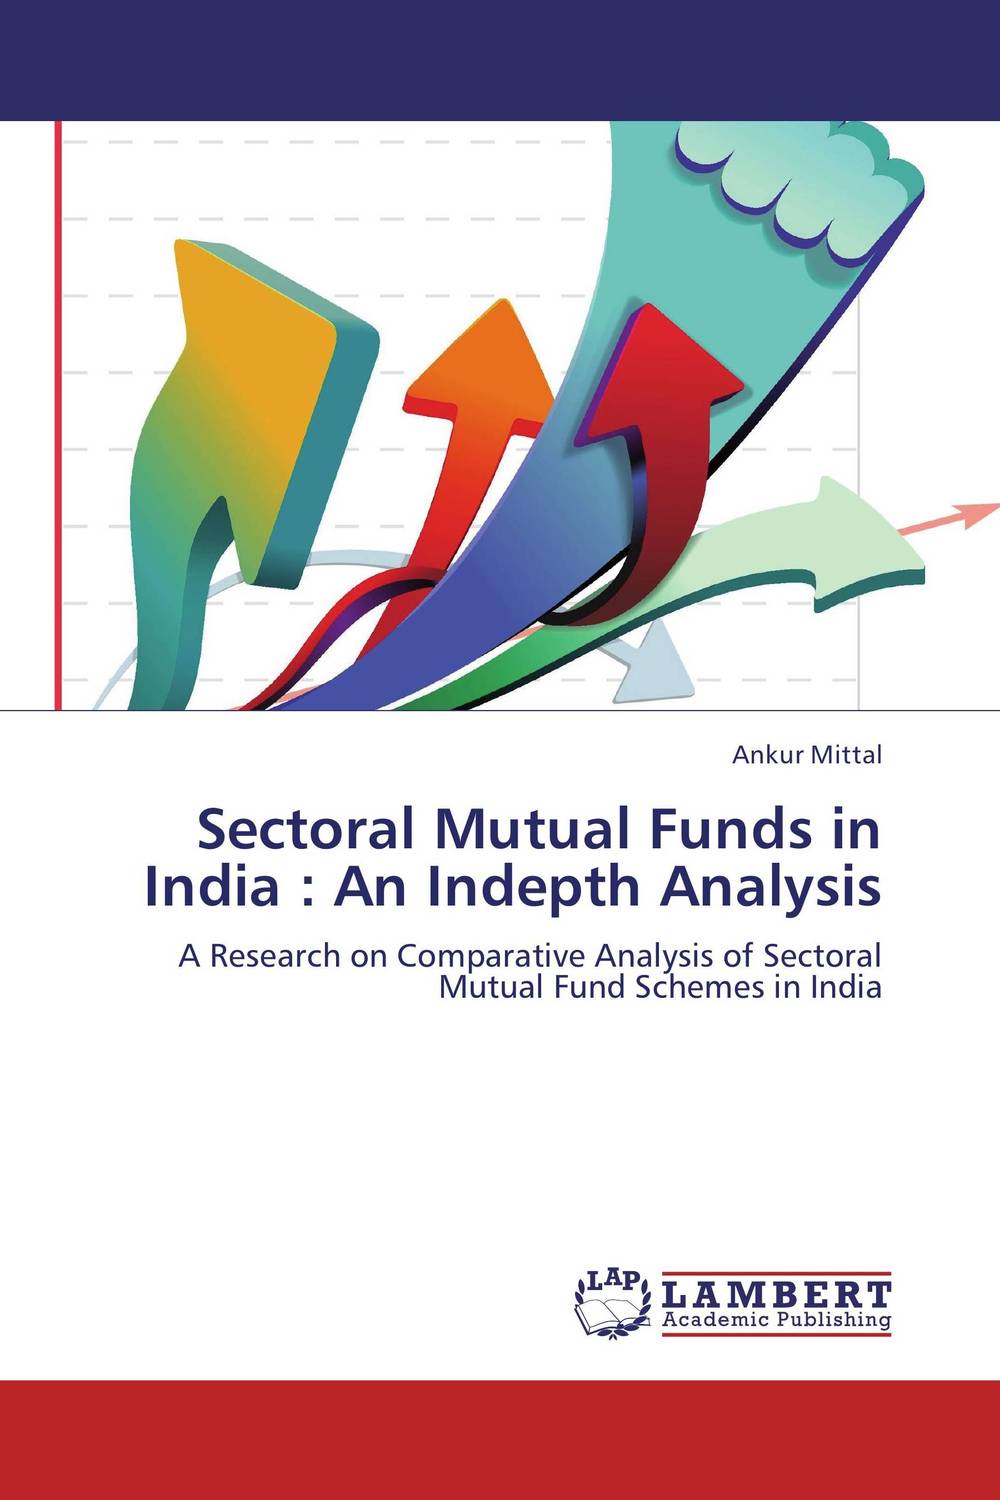 Sectoral Mutual Funds in India : An Indepth Analysis